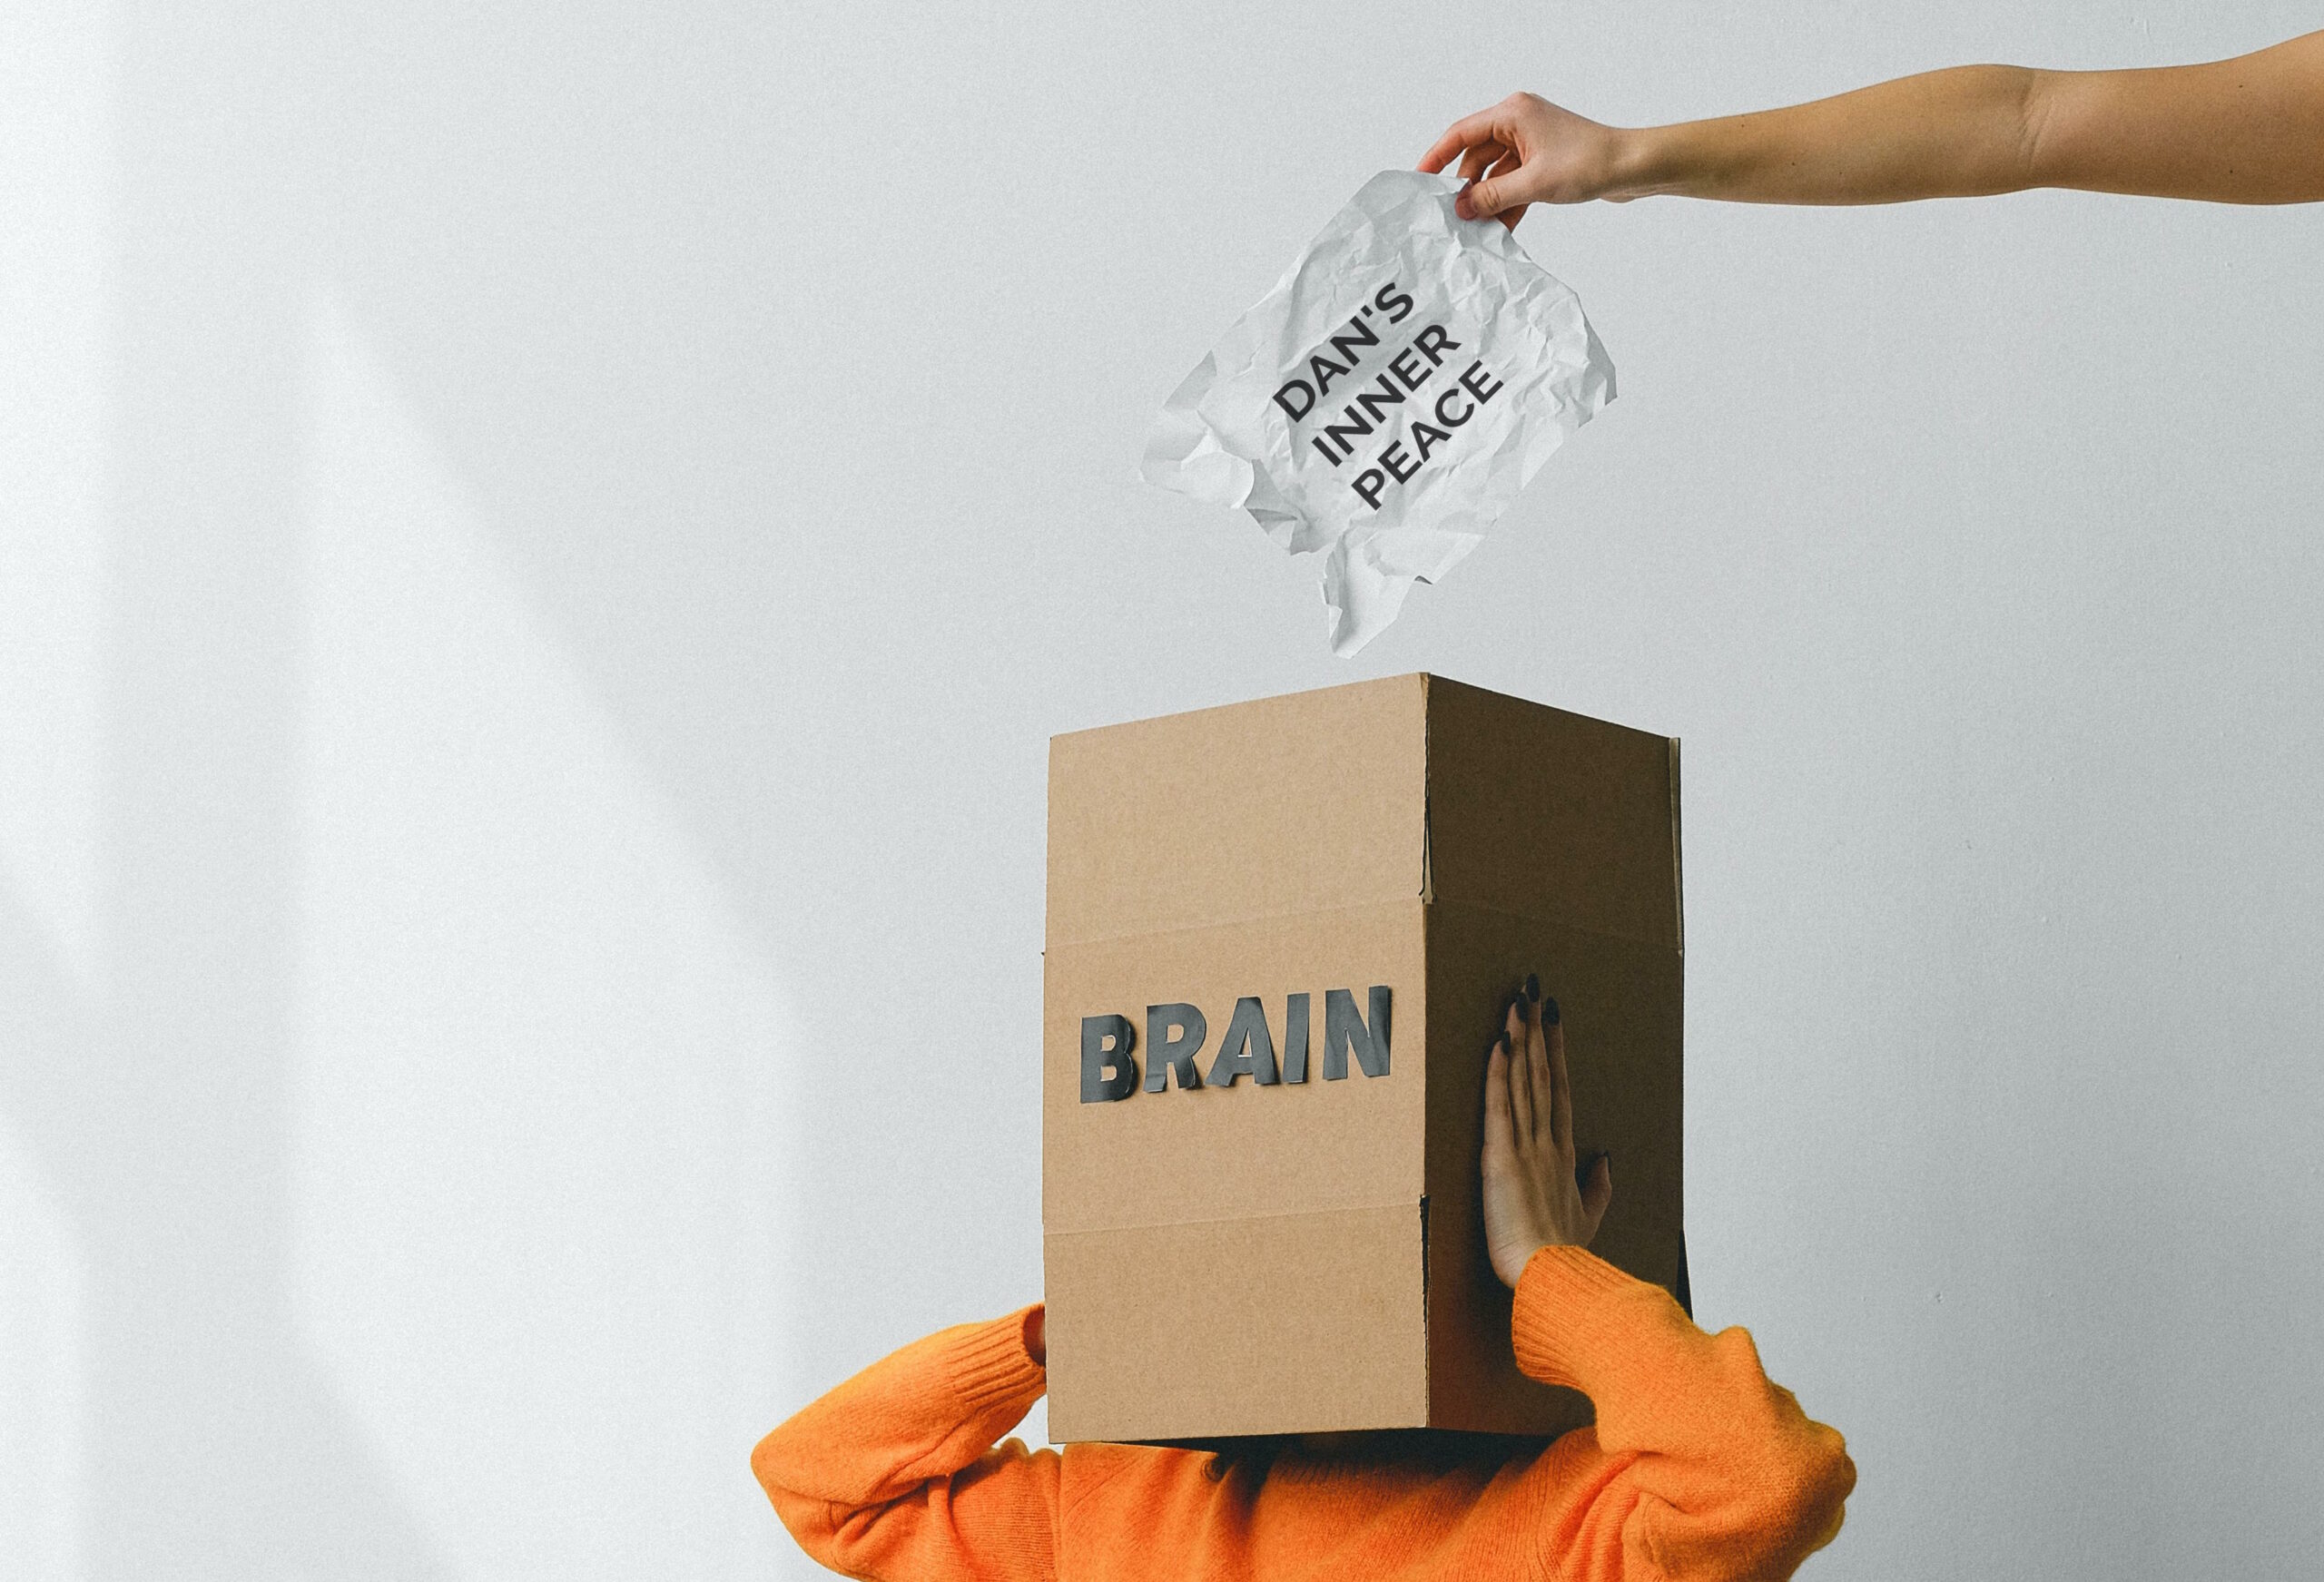 A person in an orange jumper holds a cardboard box labelled "BRAIN", which completely covers their head. From outside the image, an hand above the box is holding a piece of paper labelled "DAN'S INNER PEACE".